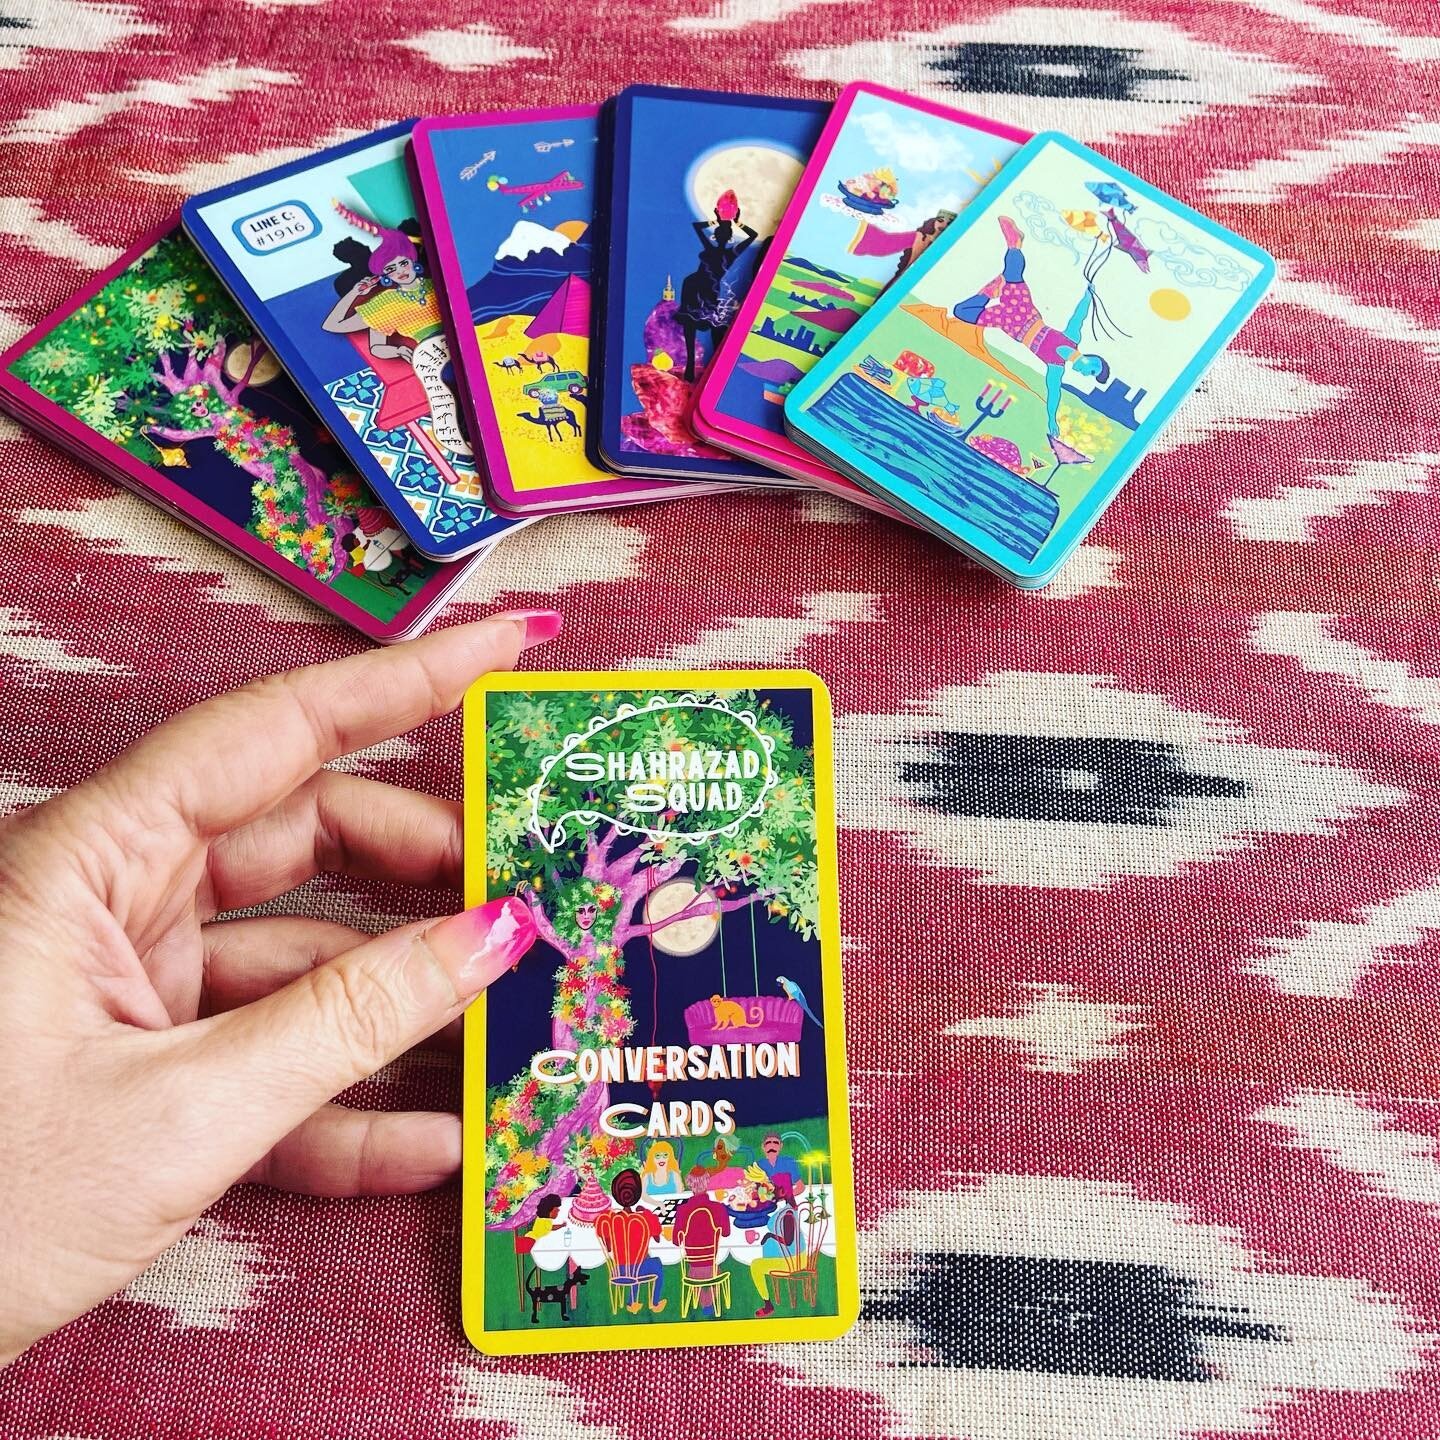 Introducing the Shahrazad Squad Conversation Cards!  Inspired by the character of Shahrazad in &lsquo;1001 Nights&rsquo; (also an  archetype of the Feminine Power), our project imagines a world led by MENASA/SWANASA/BIPOC women and girls, using their